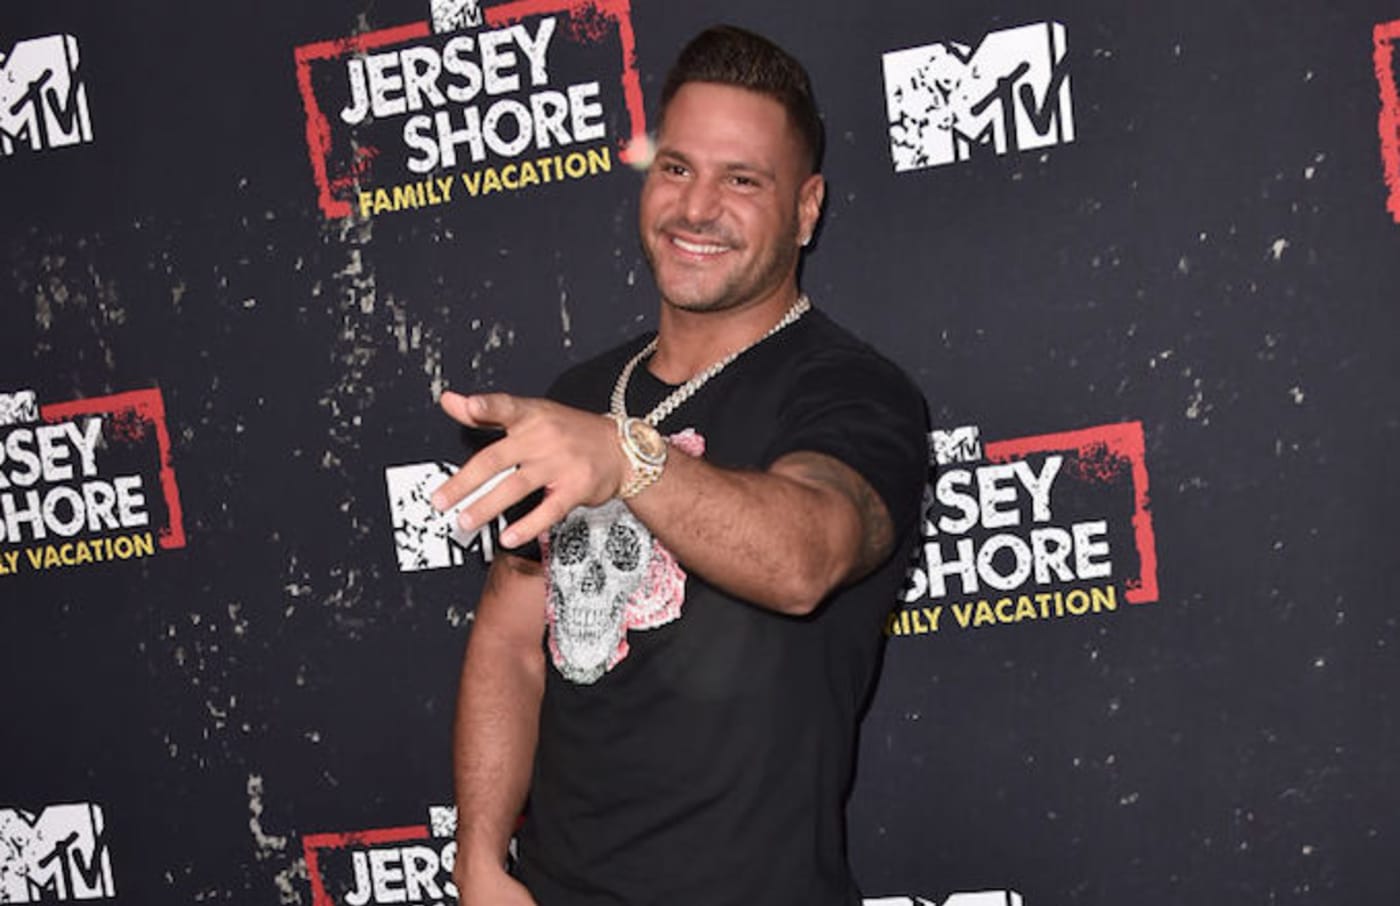 ‘Jersey Shore’ Details Ronnie’s Injuries After Girlfriend Dragged Him